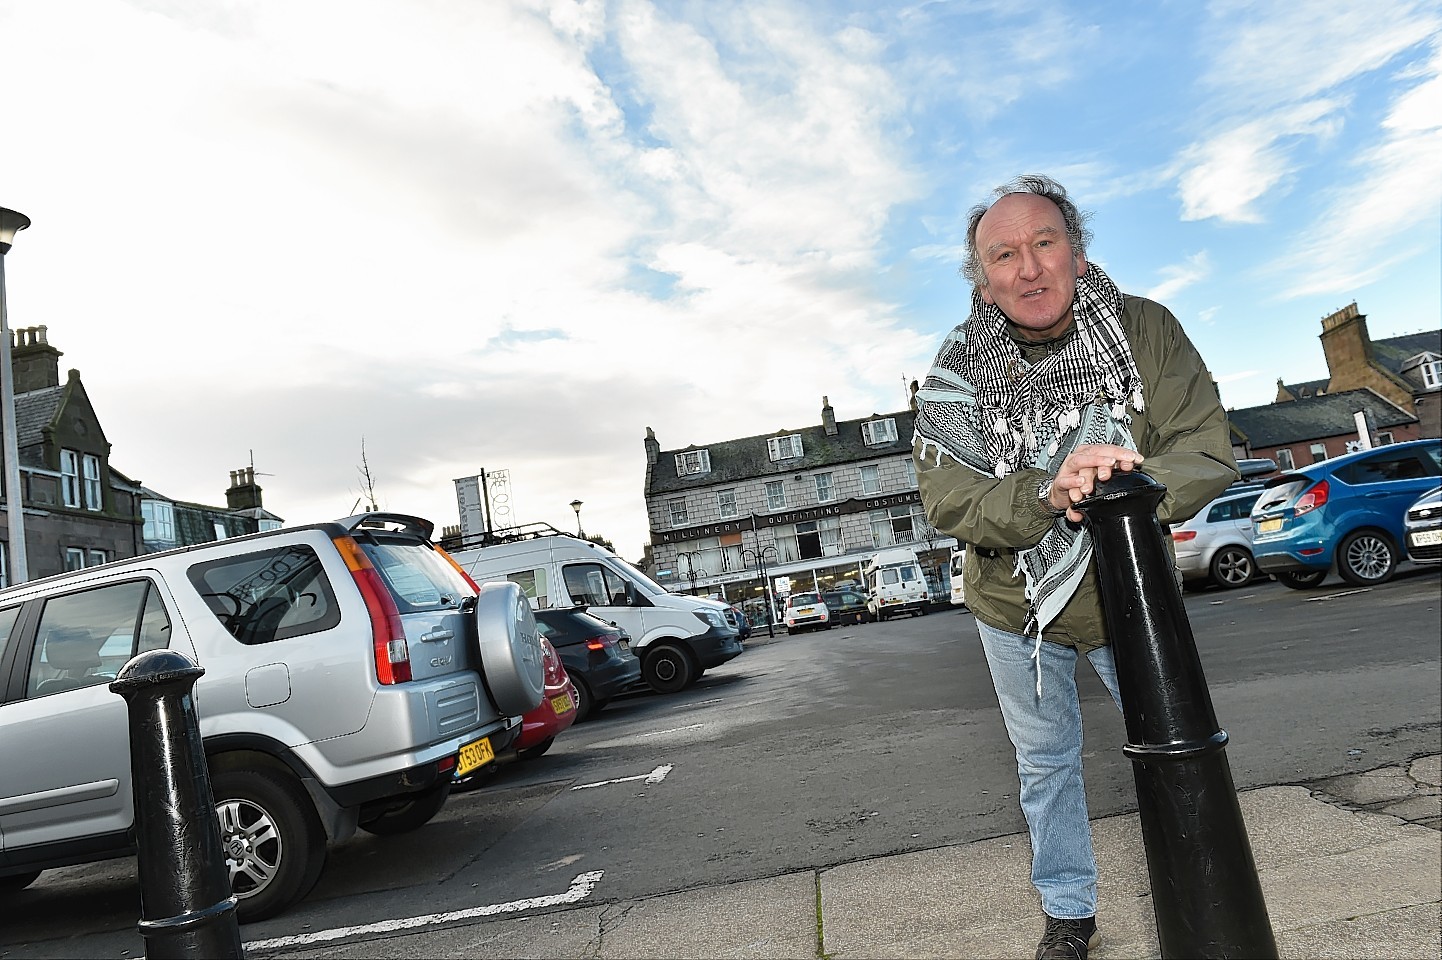 Stonehaven Square - Stonehaven and District Community Council are spearheading plans to revamp the town square and utilise part of the car park. Pictured is Phil Mills-Bishop.
Picture by COLIN RENNIE